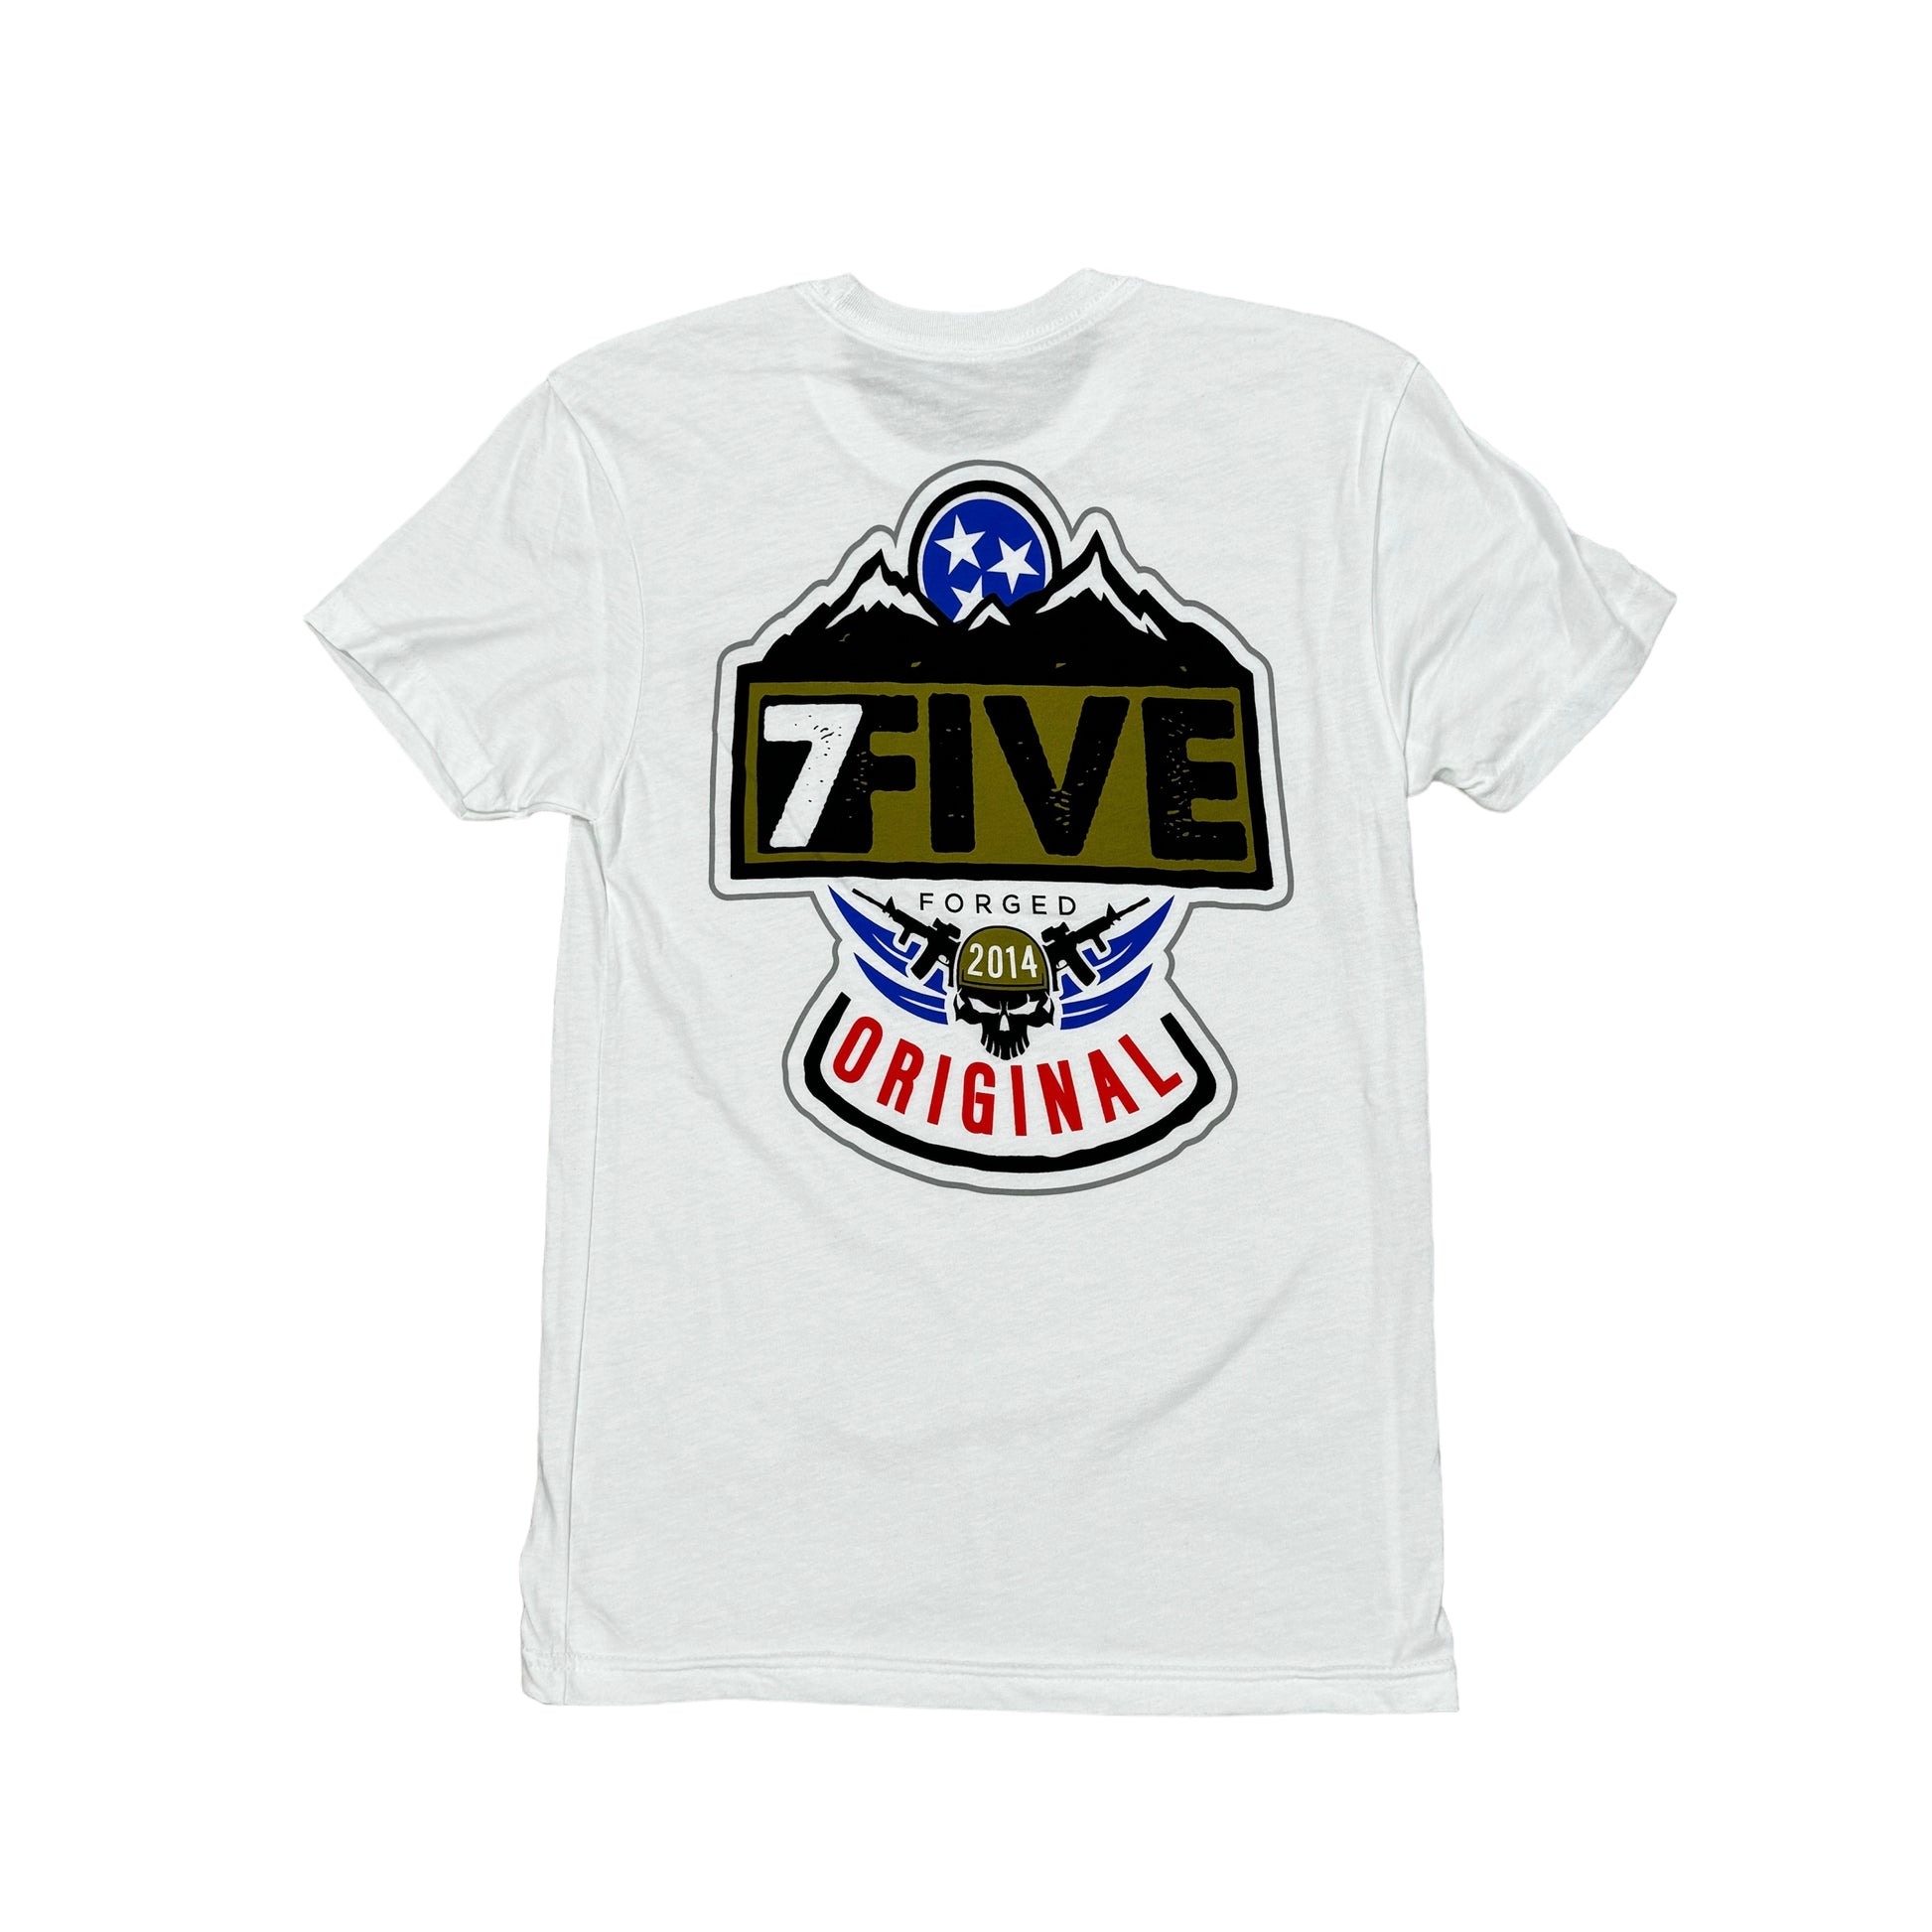 7Five Forged - 7Five Clothing Co.